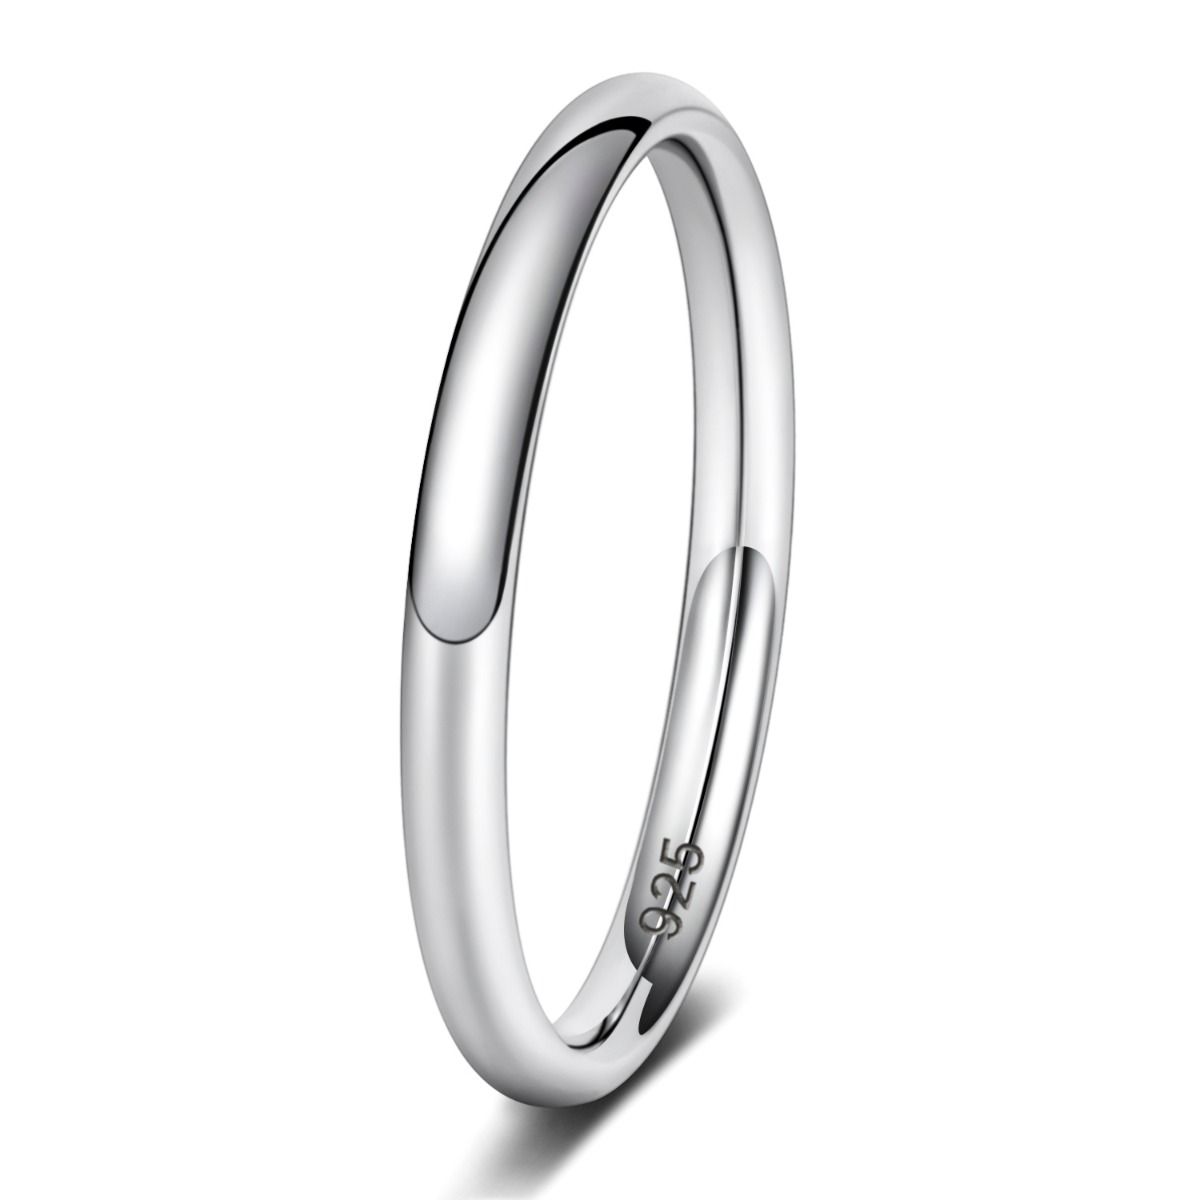 1.5mm Women 925 Sterling Silver Stackable Ring or Wedding Bands